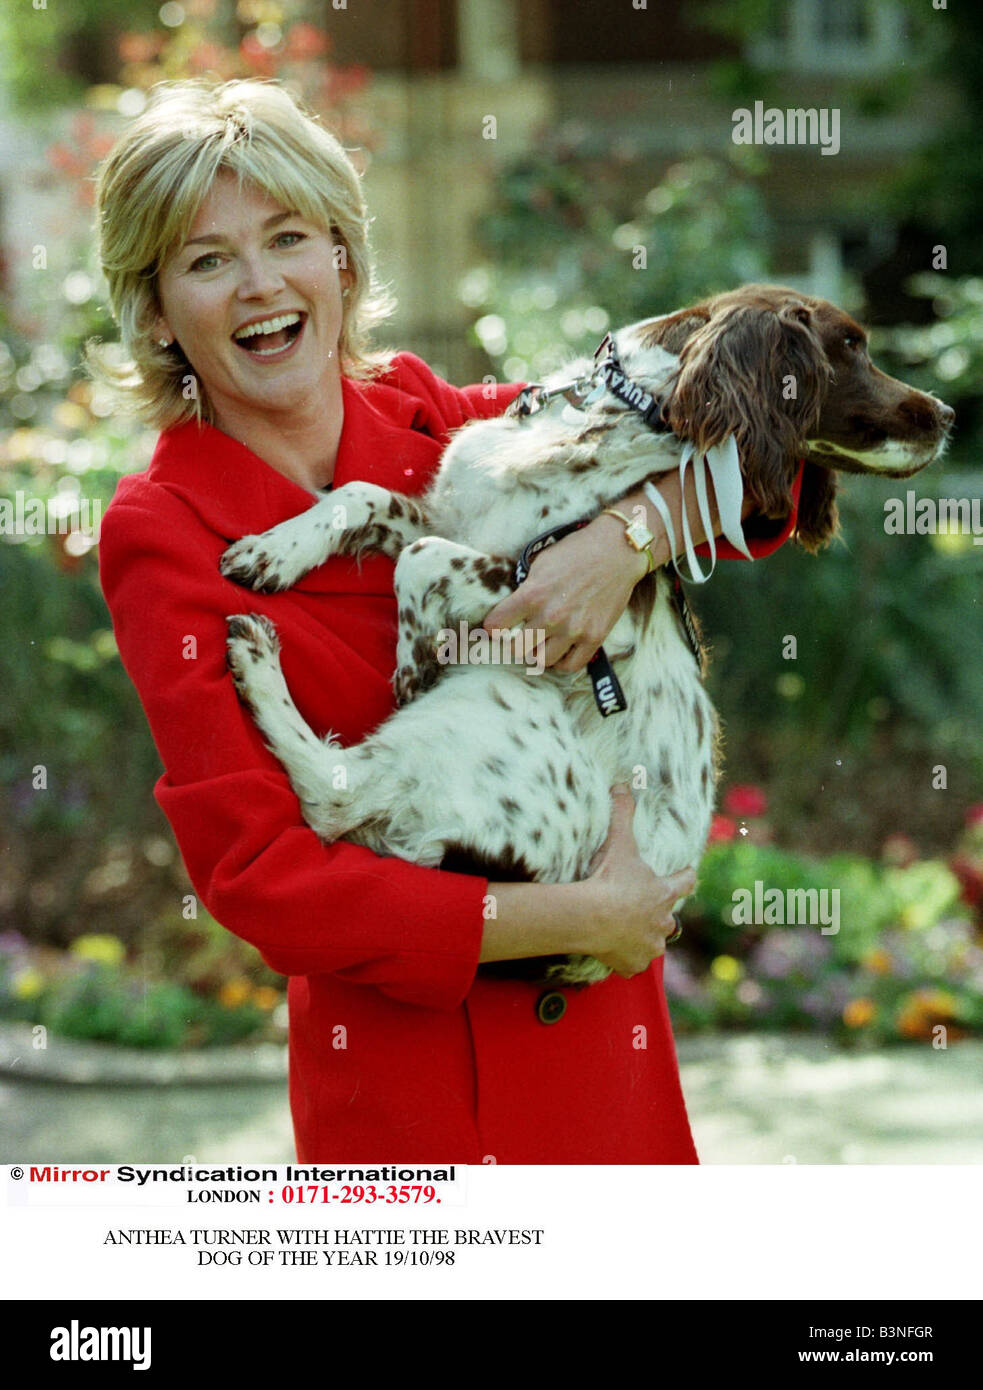 Anthea Turner TV Presenter with Hattie October 1998 Television Presenter Anthea Turner is pictured holding Hattie the Dog winner at the Bravest Dog of the Year Awards Stock Photo